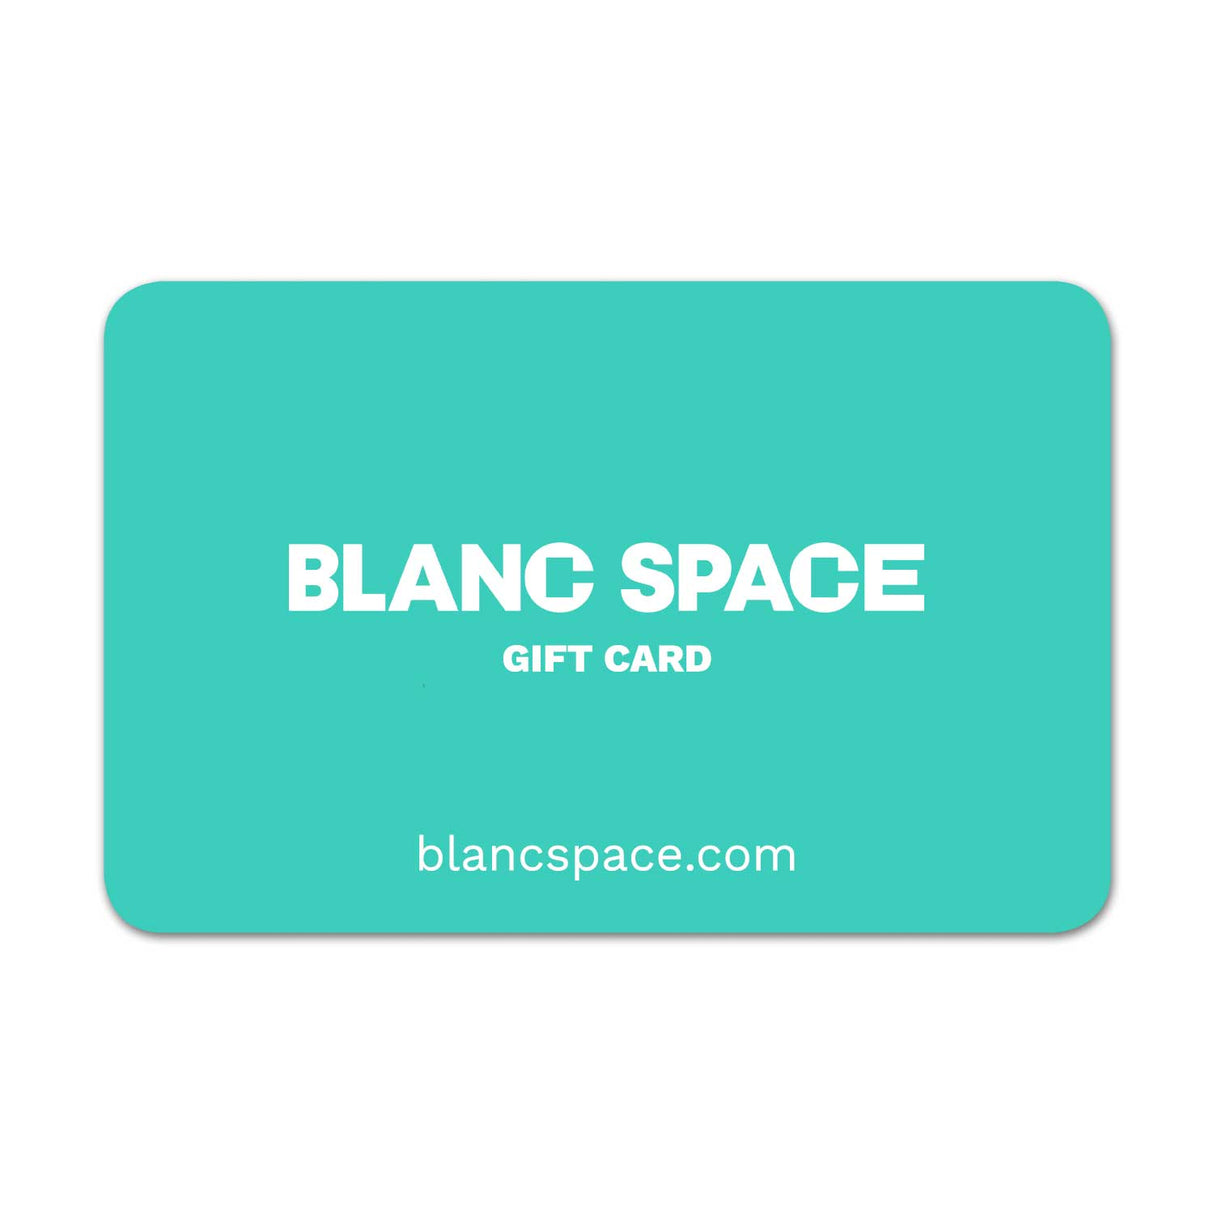 Blanc Space  Gift Card £10.00,£20.00,£30.00,£40.00,£50.00,£60.00,£70.00,£80.00,£90.00,£100.00 Blanc Space